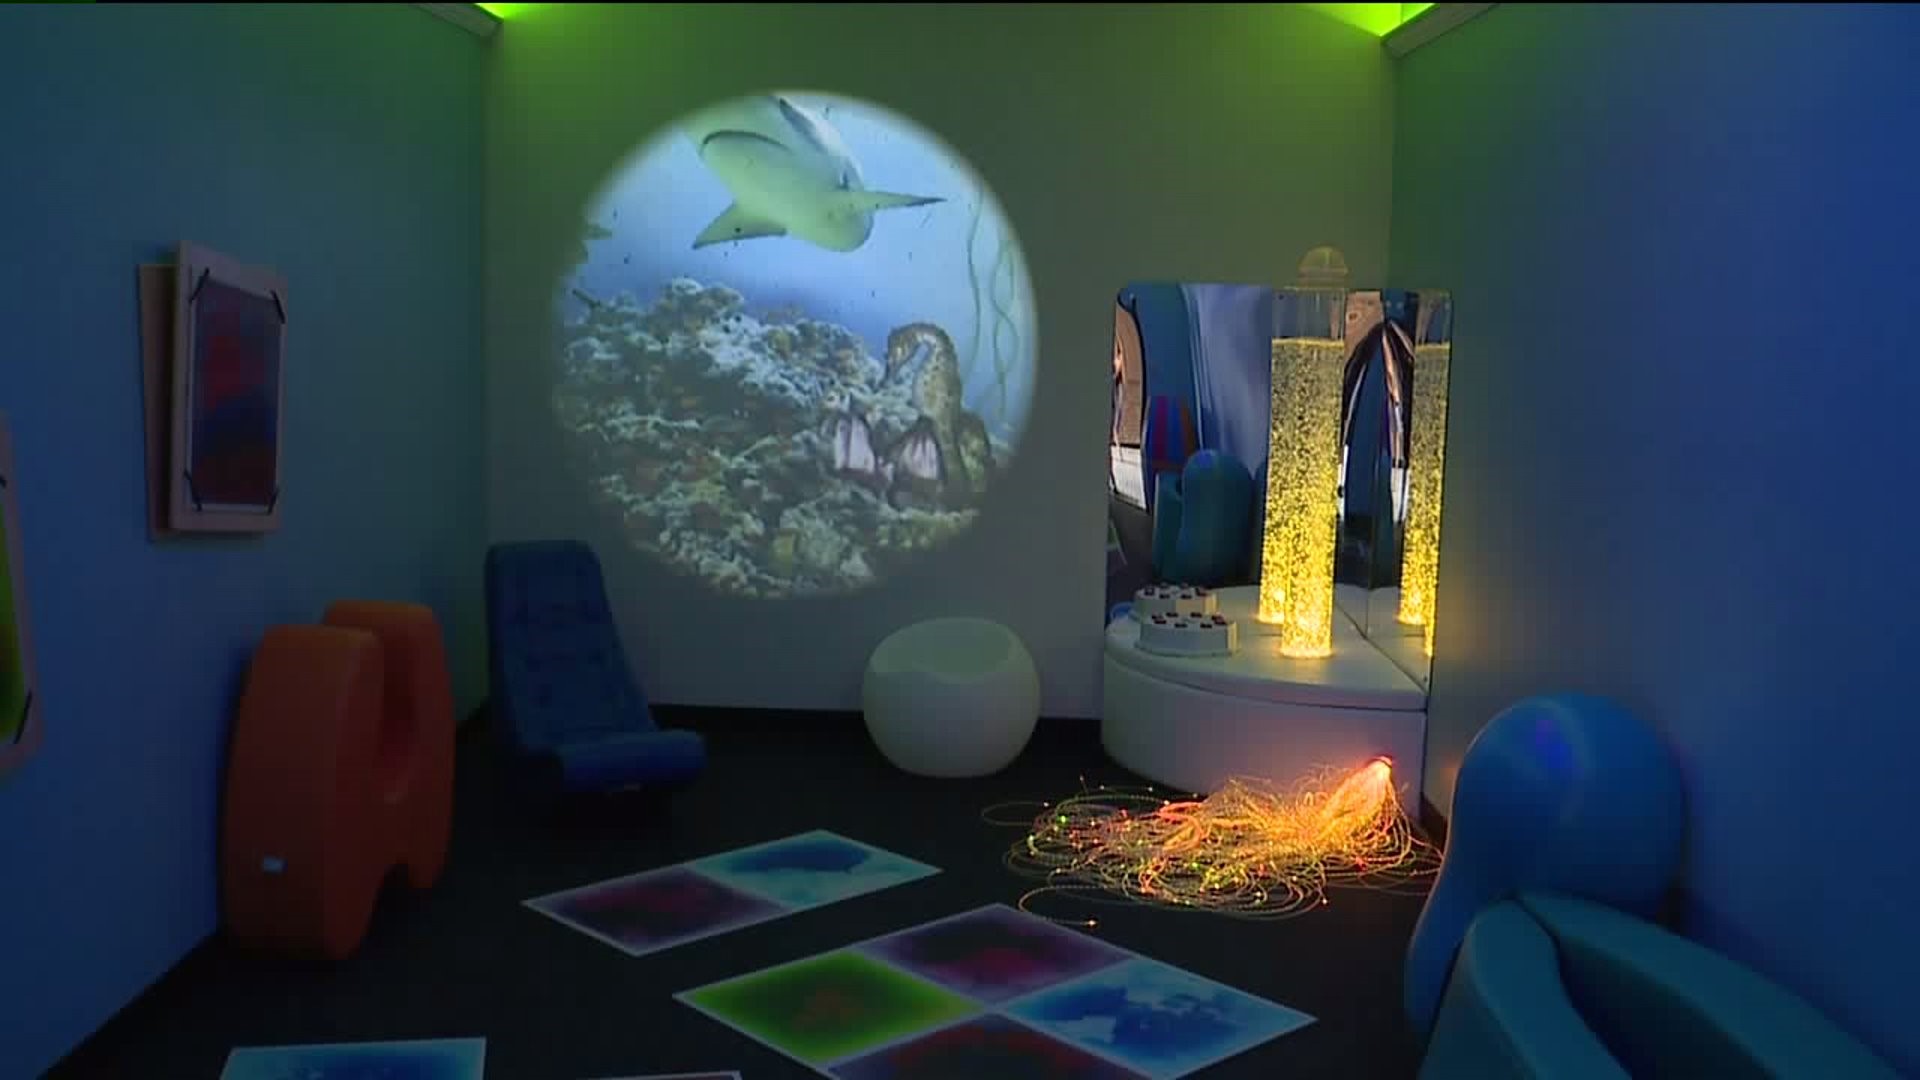 Healthwatch 16: Sensory Room at Lehigh Valley Airport for Troubled Travelers